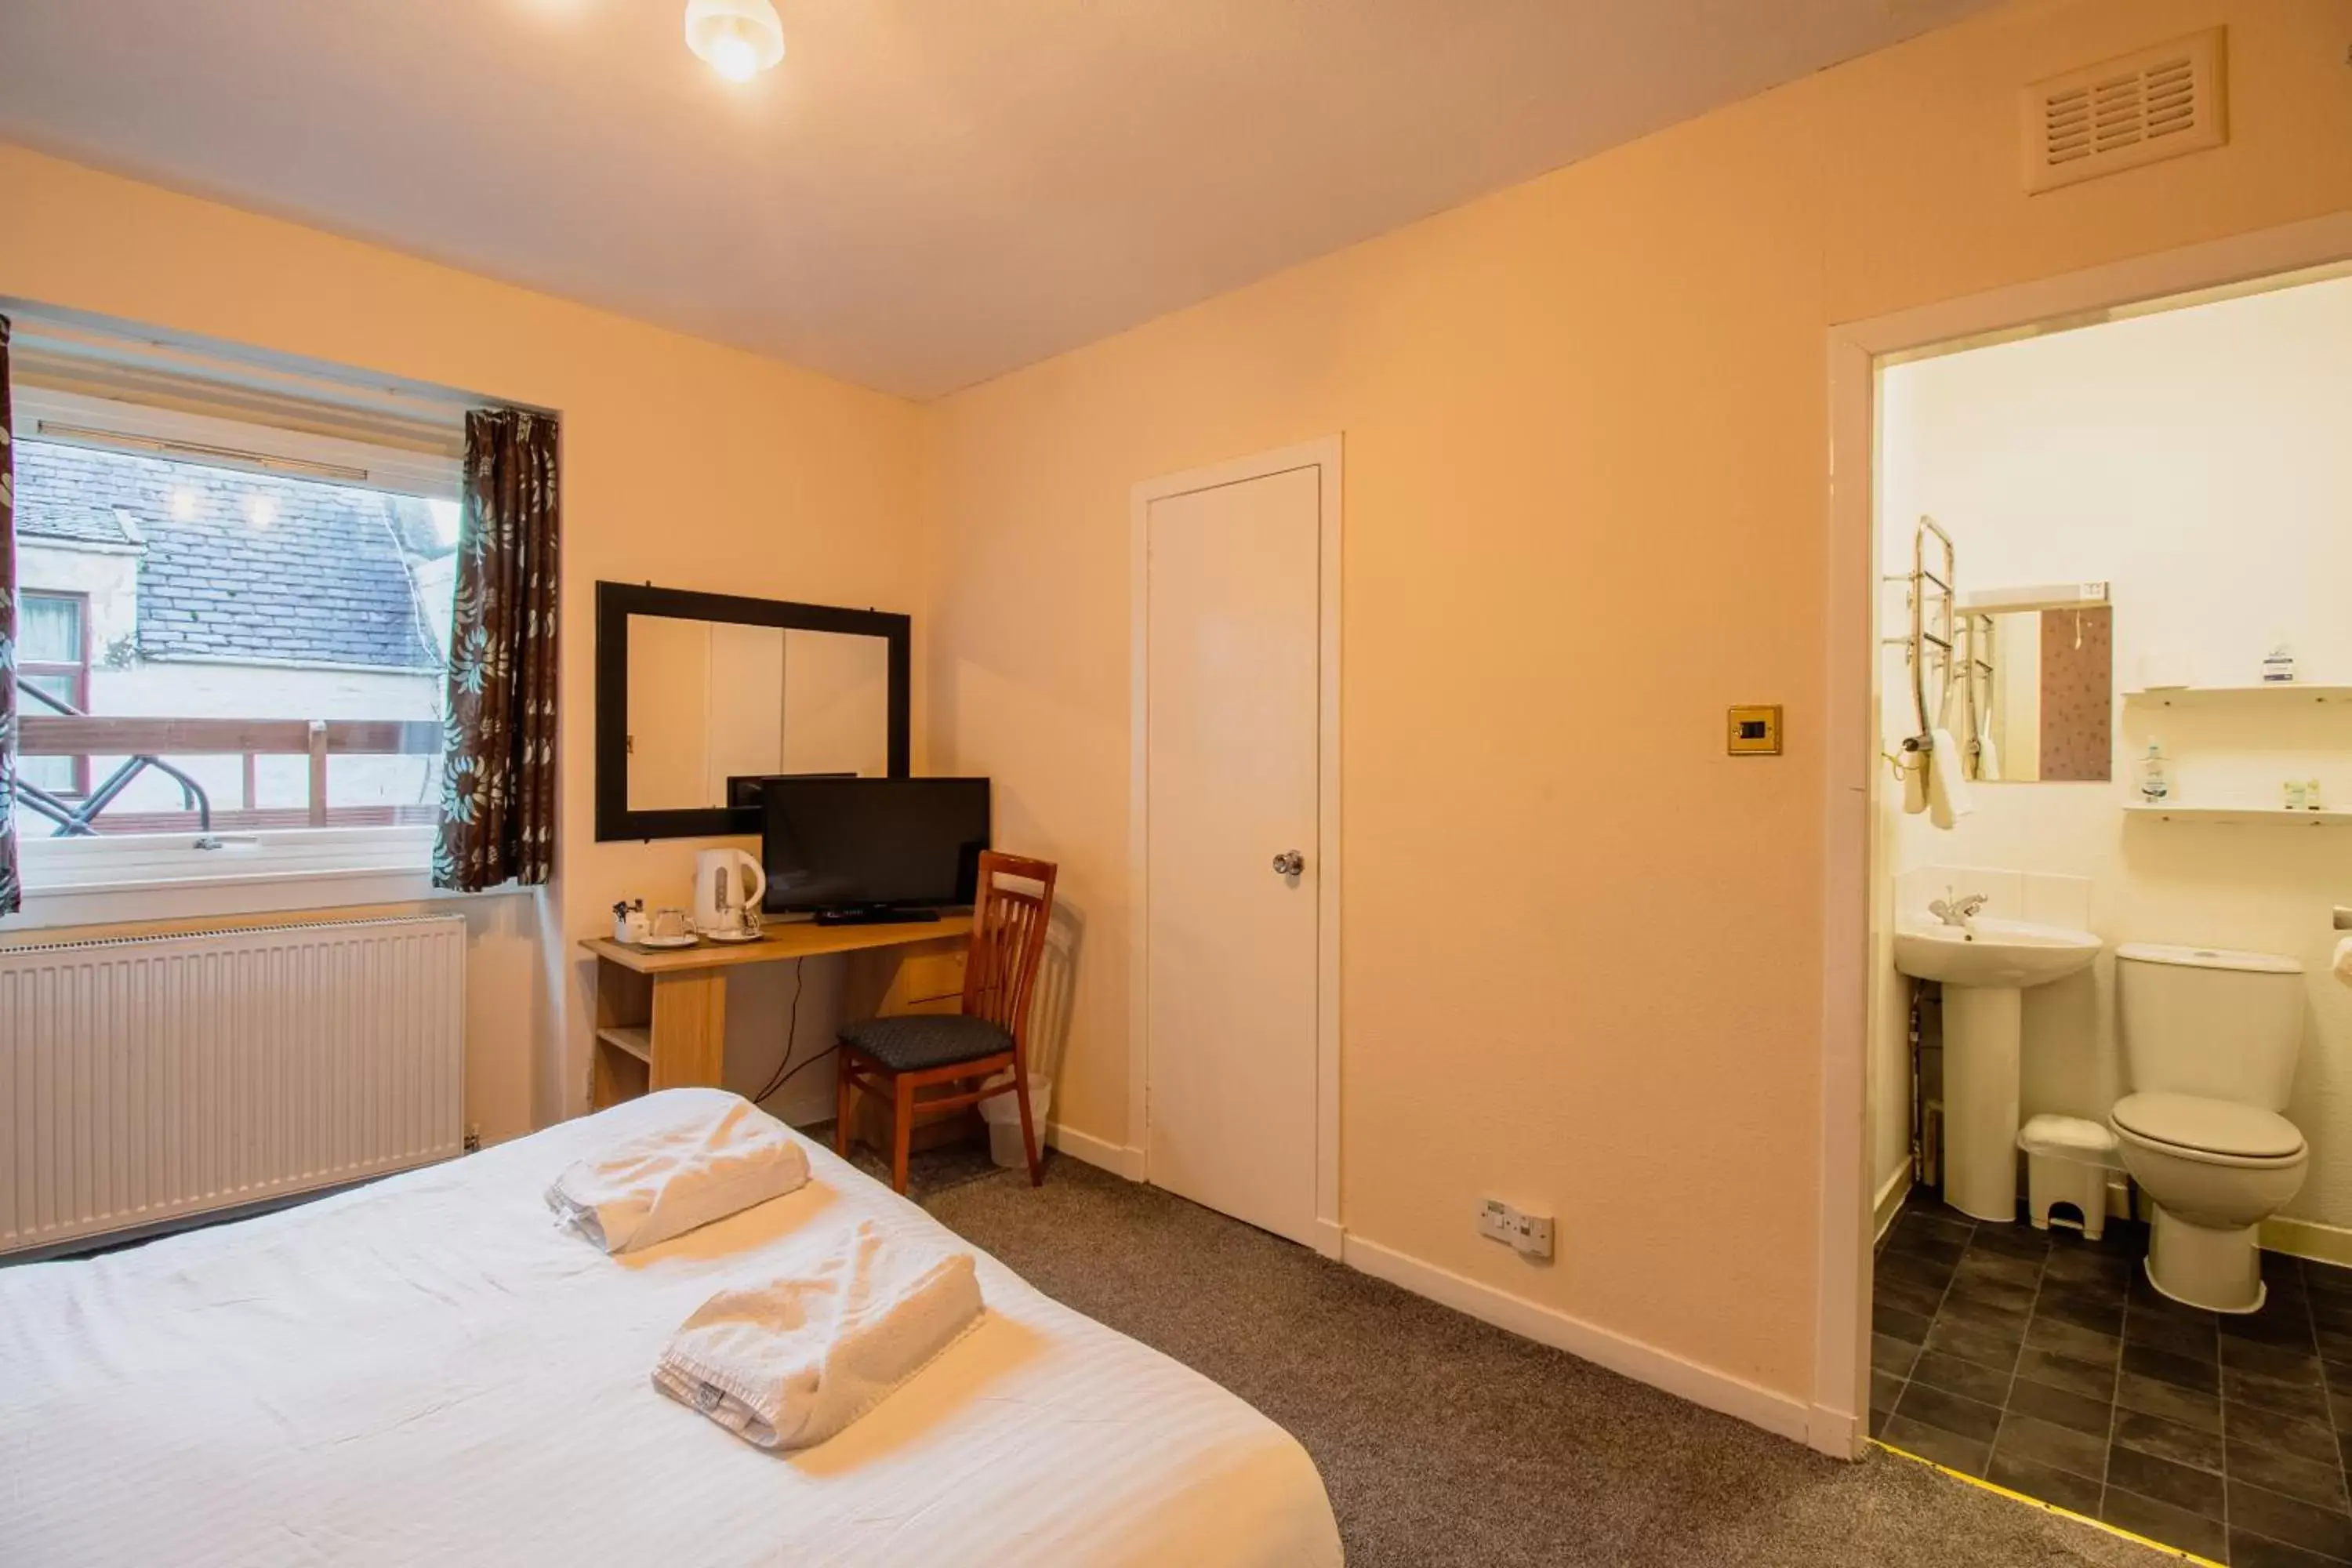 Double Room with Private Bathroom in The Ben Mhor Hotel, Bar & Restaurant